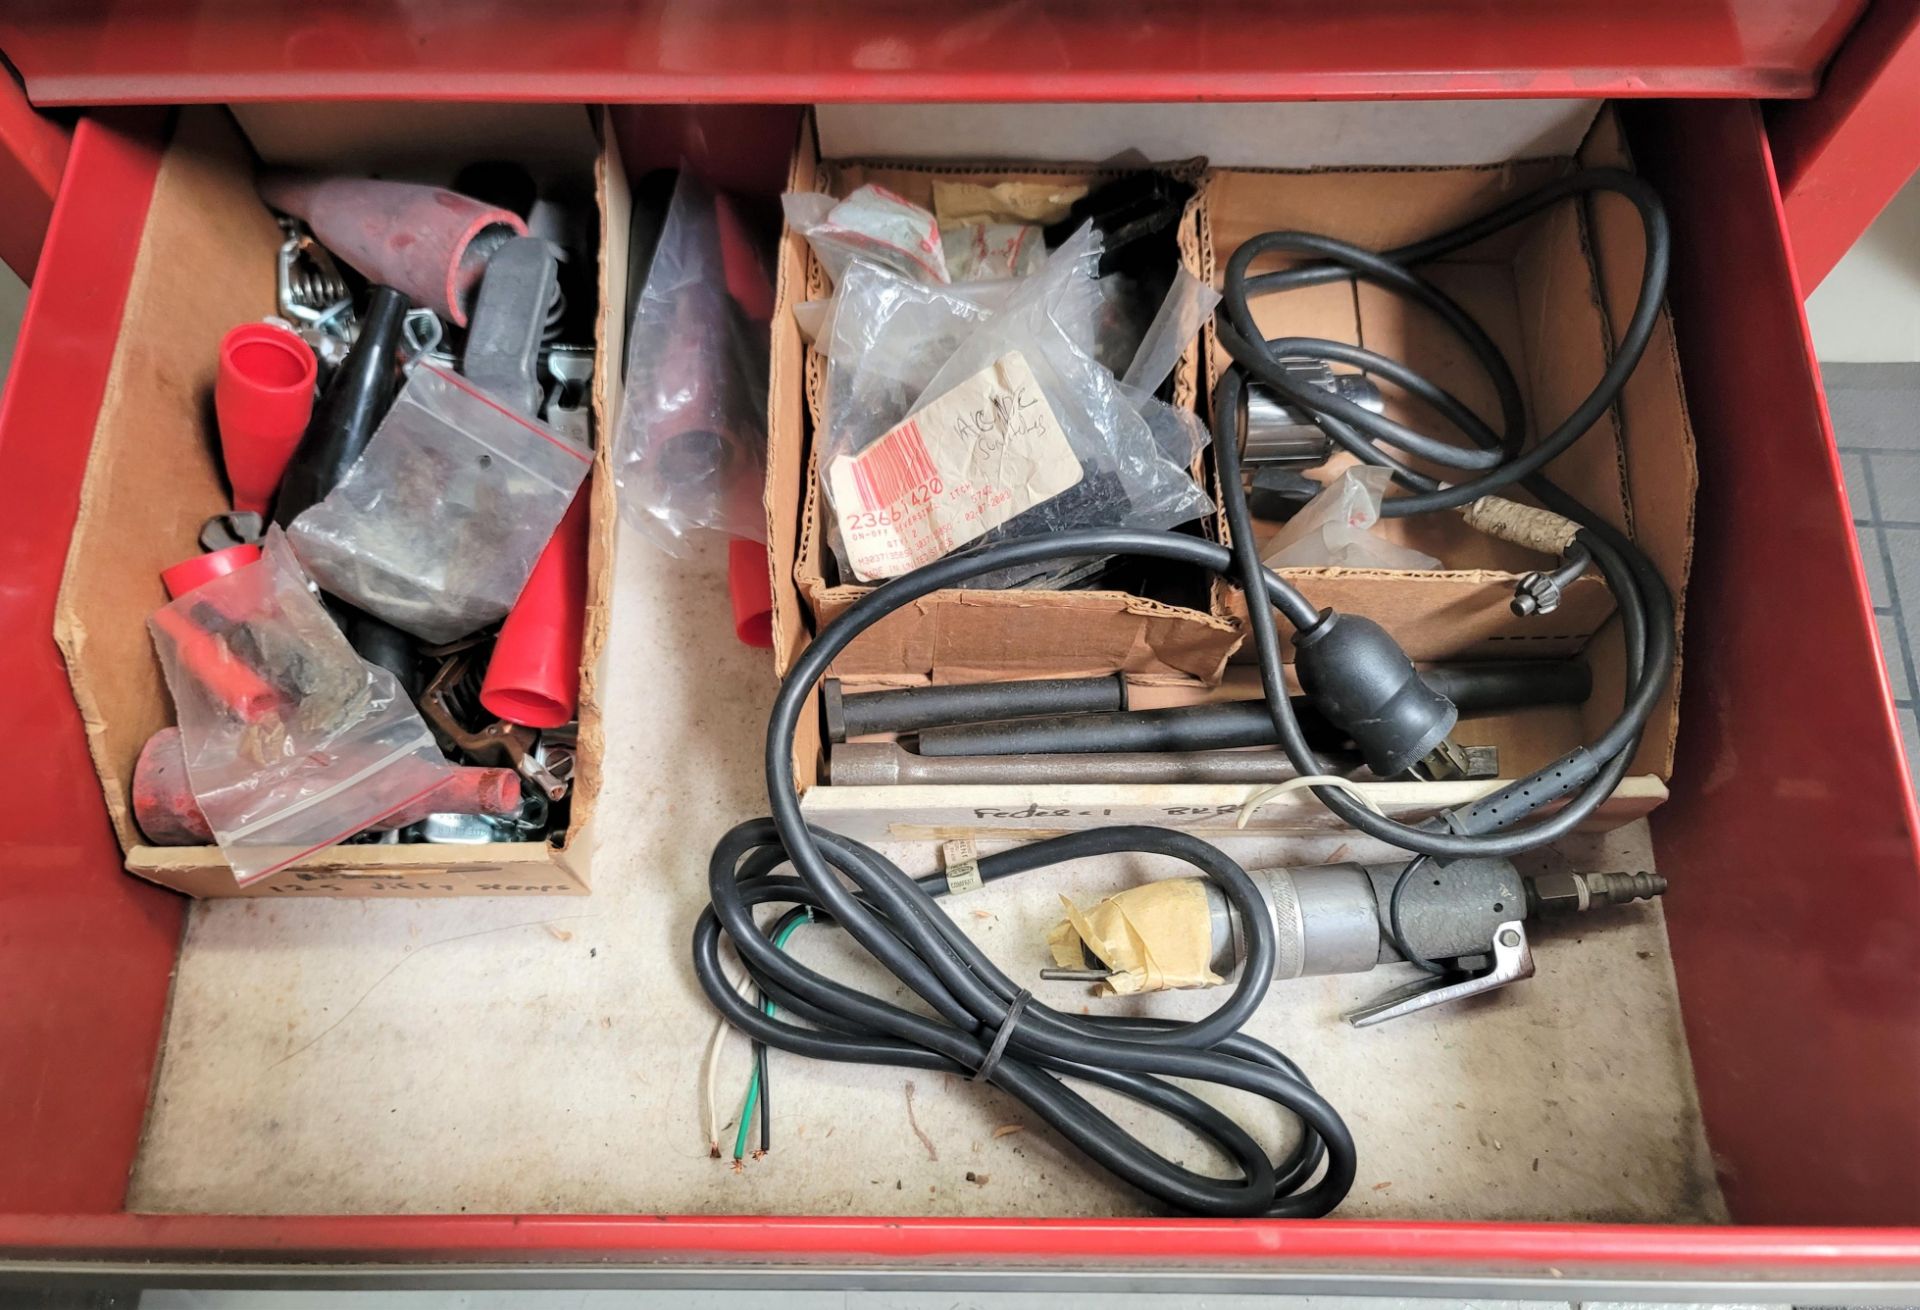 CRAFTSMAN 65434 BOTTOM TOOL BOX, W/ CONTENTS OF ASSORTED HAND TOOLS - Image 5 of 6